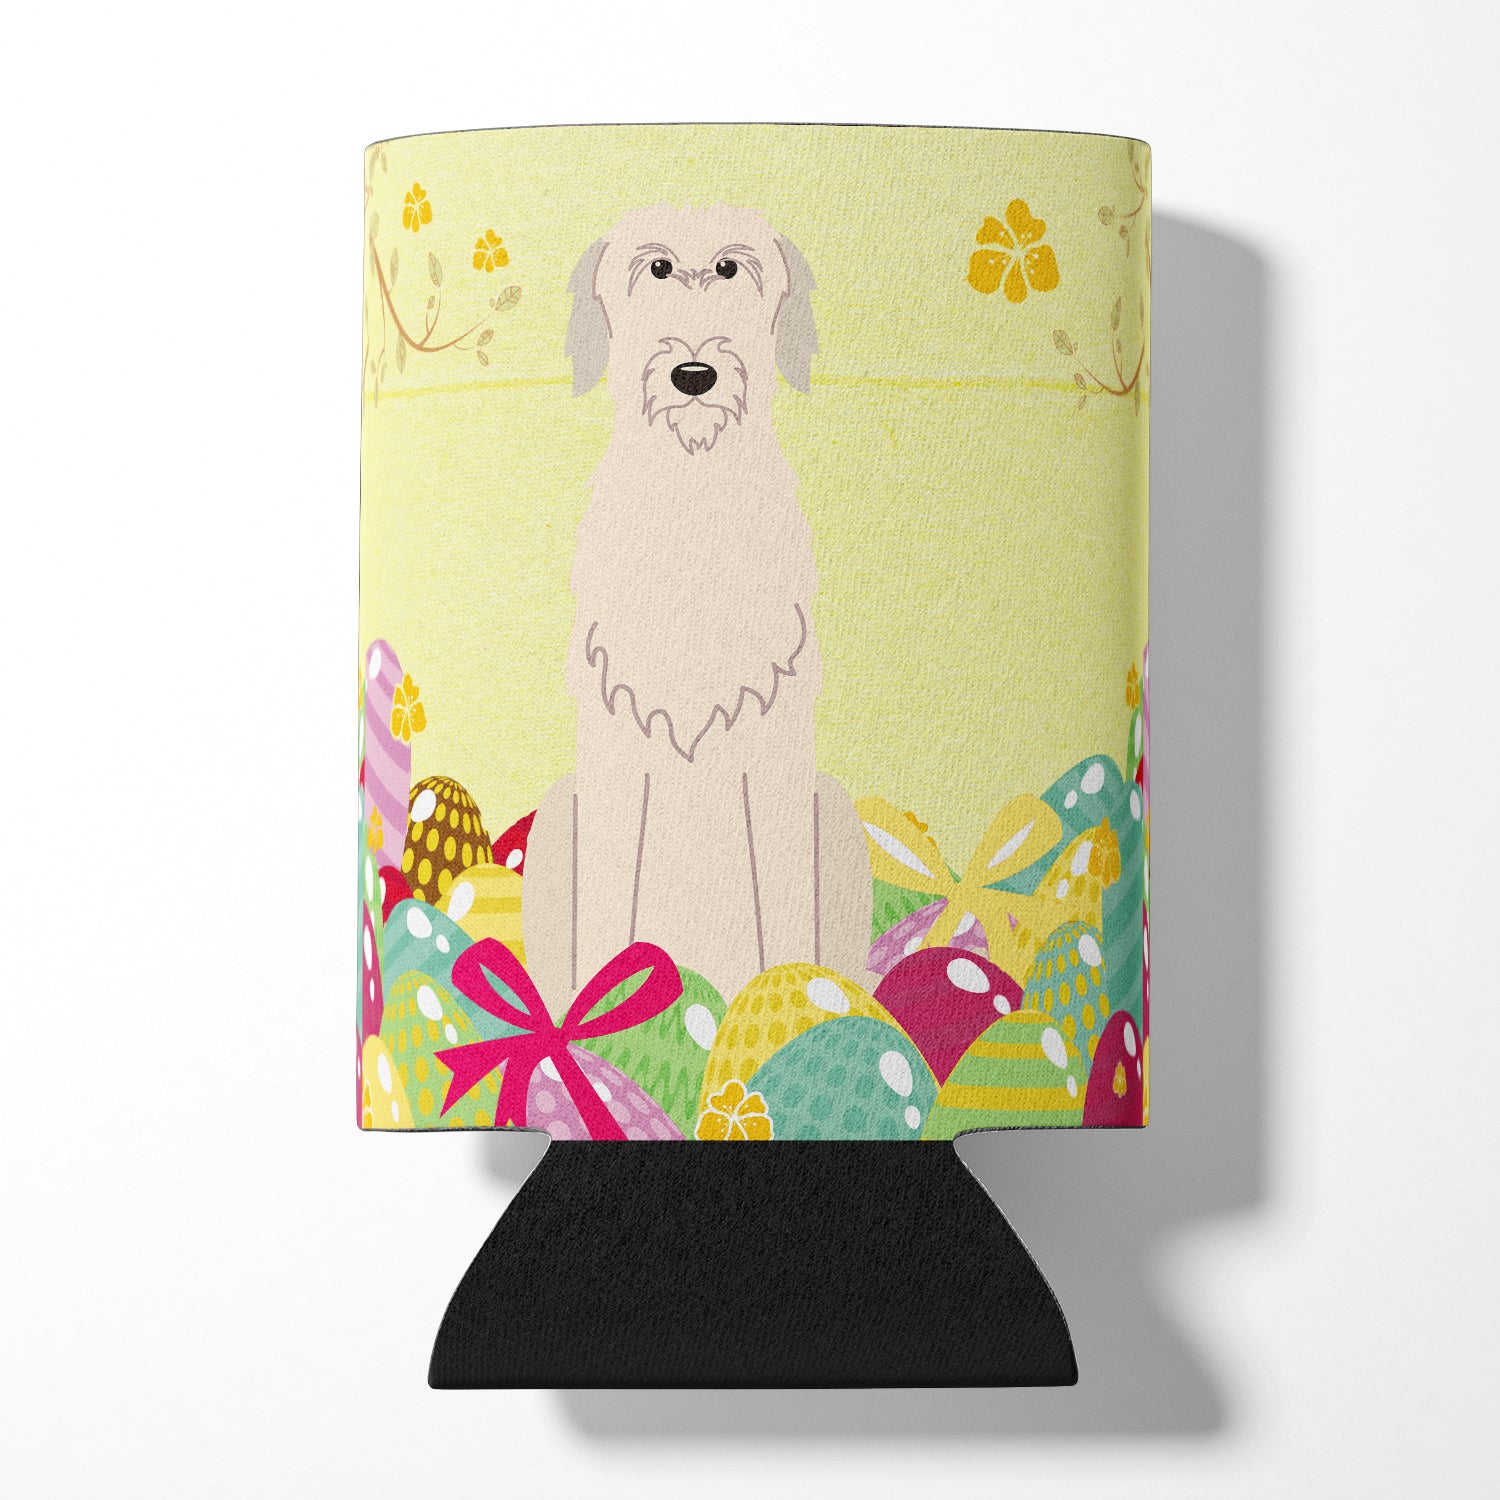 Easter Eggs Irish Wolfhound Can or Bottle Hugger BB6065CC